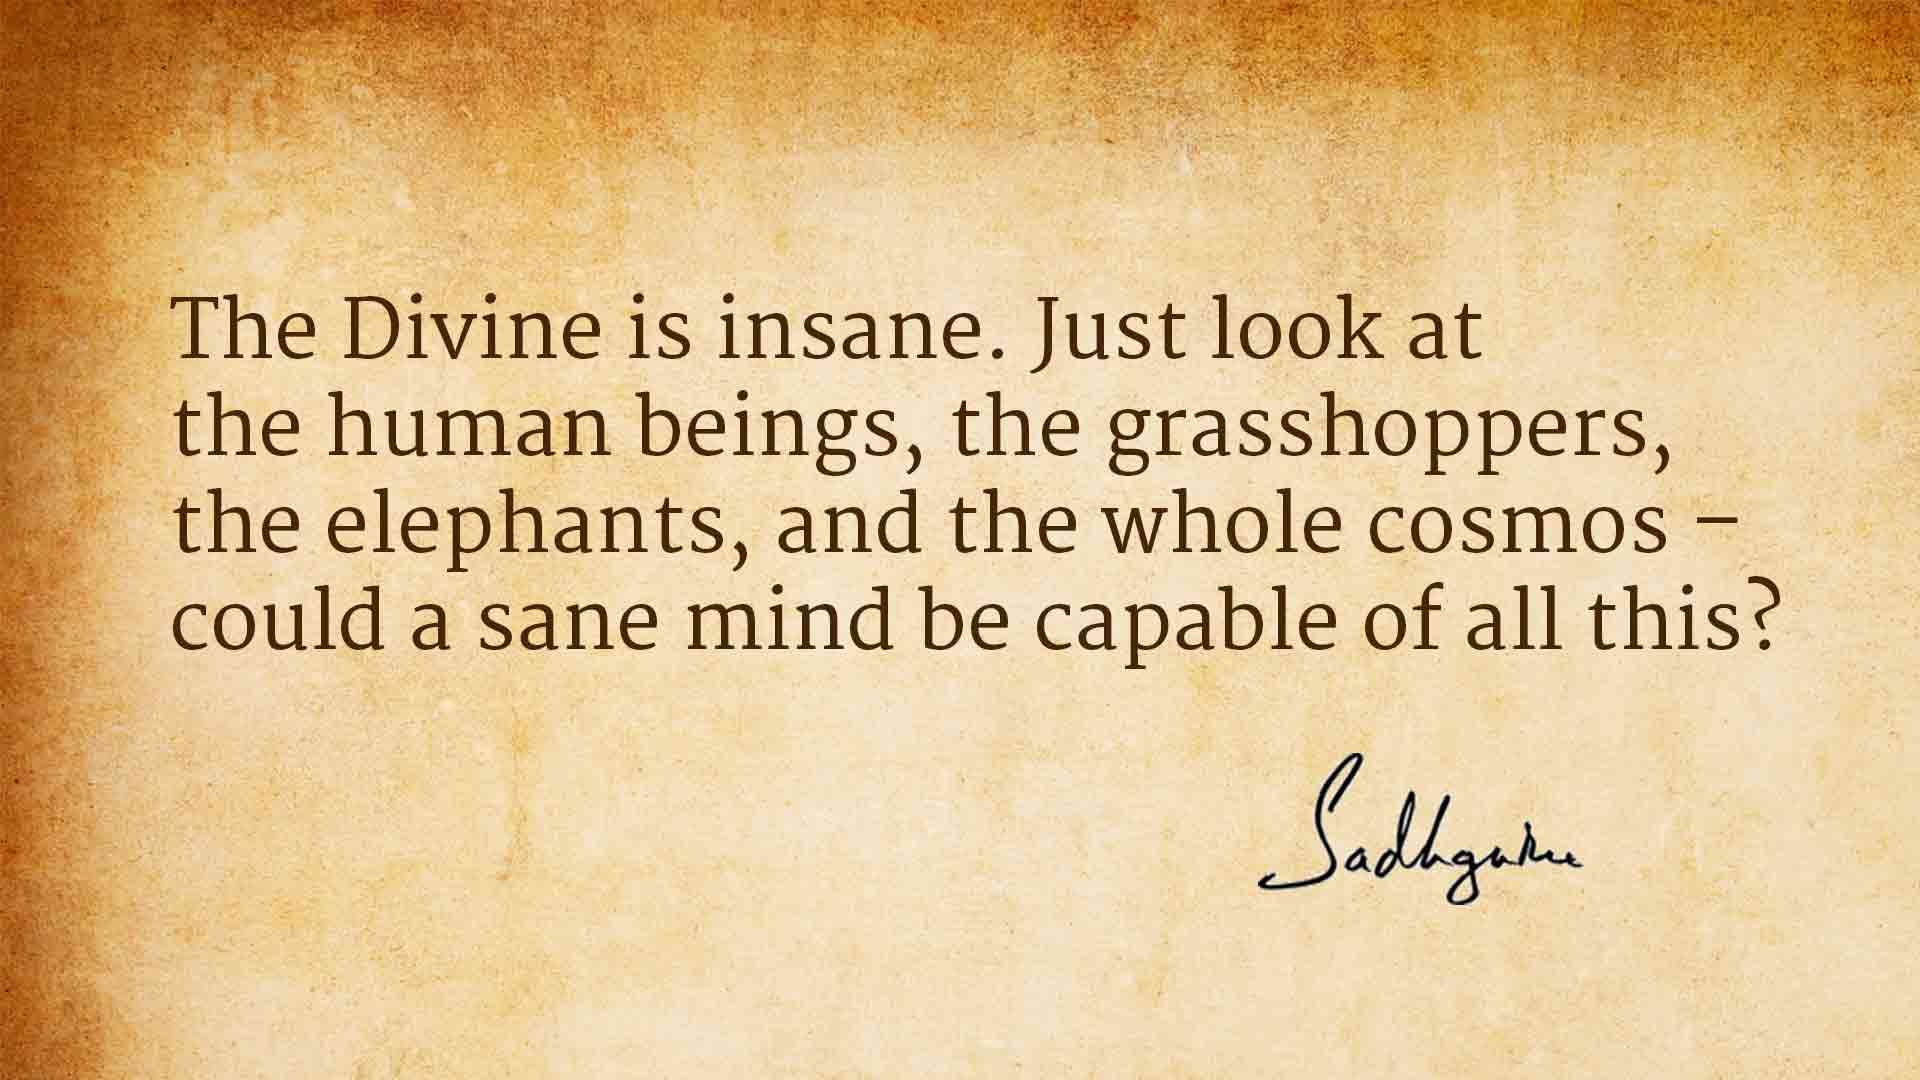 Quotes on the Mind by Sadhguru